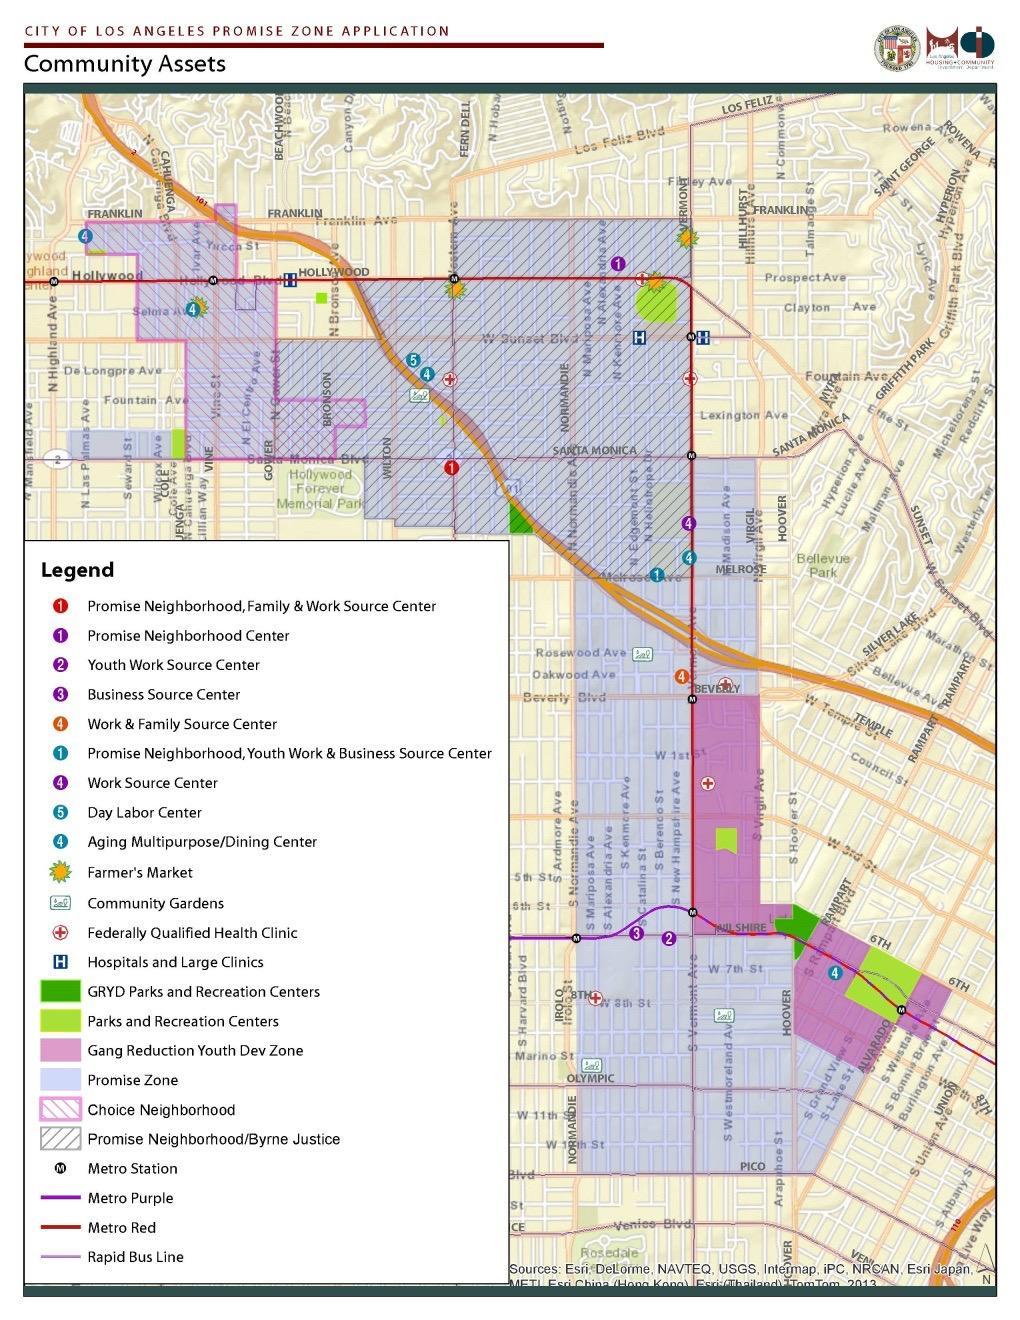 Central Los Angeles Promise Zone The Central Los Angeles Promise Zone was designated by the Obama administration in 2014.